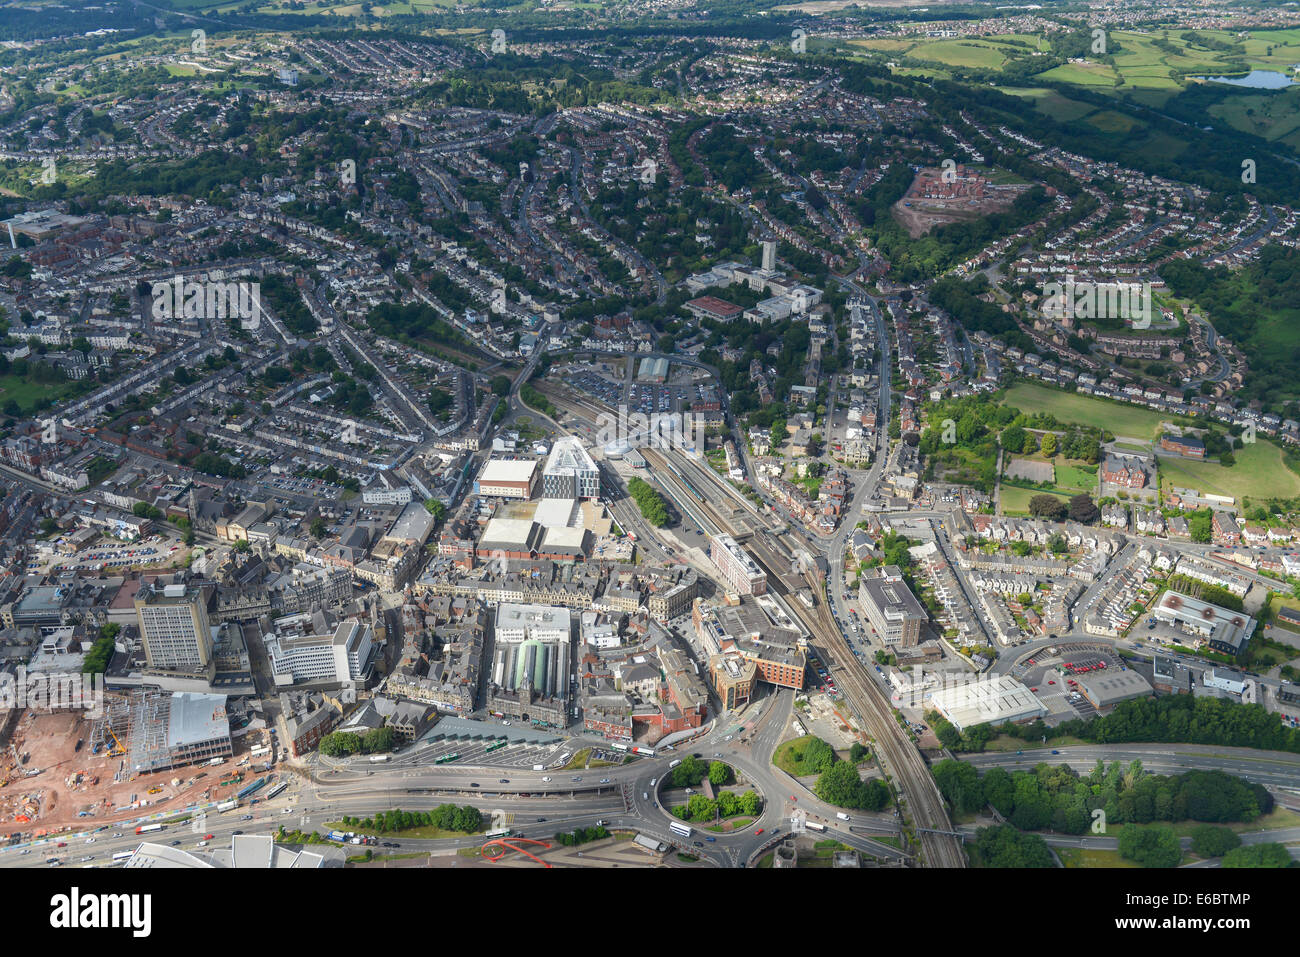 An aerial view of the City Centre of Newport in South Wales showing the area around the railway station Stock Photo